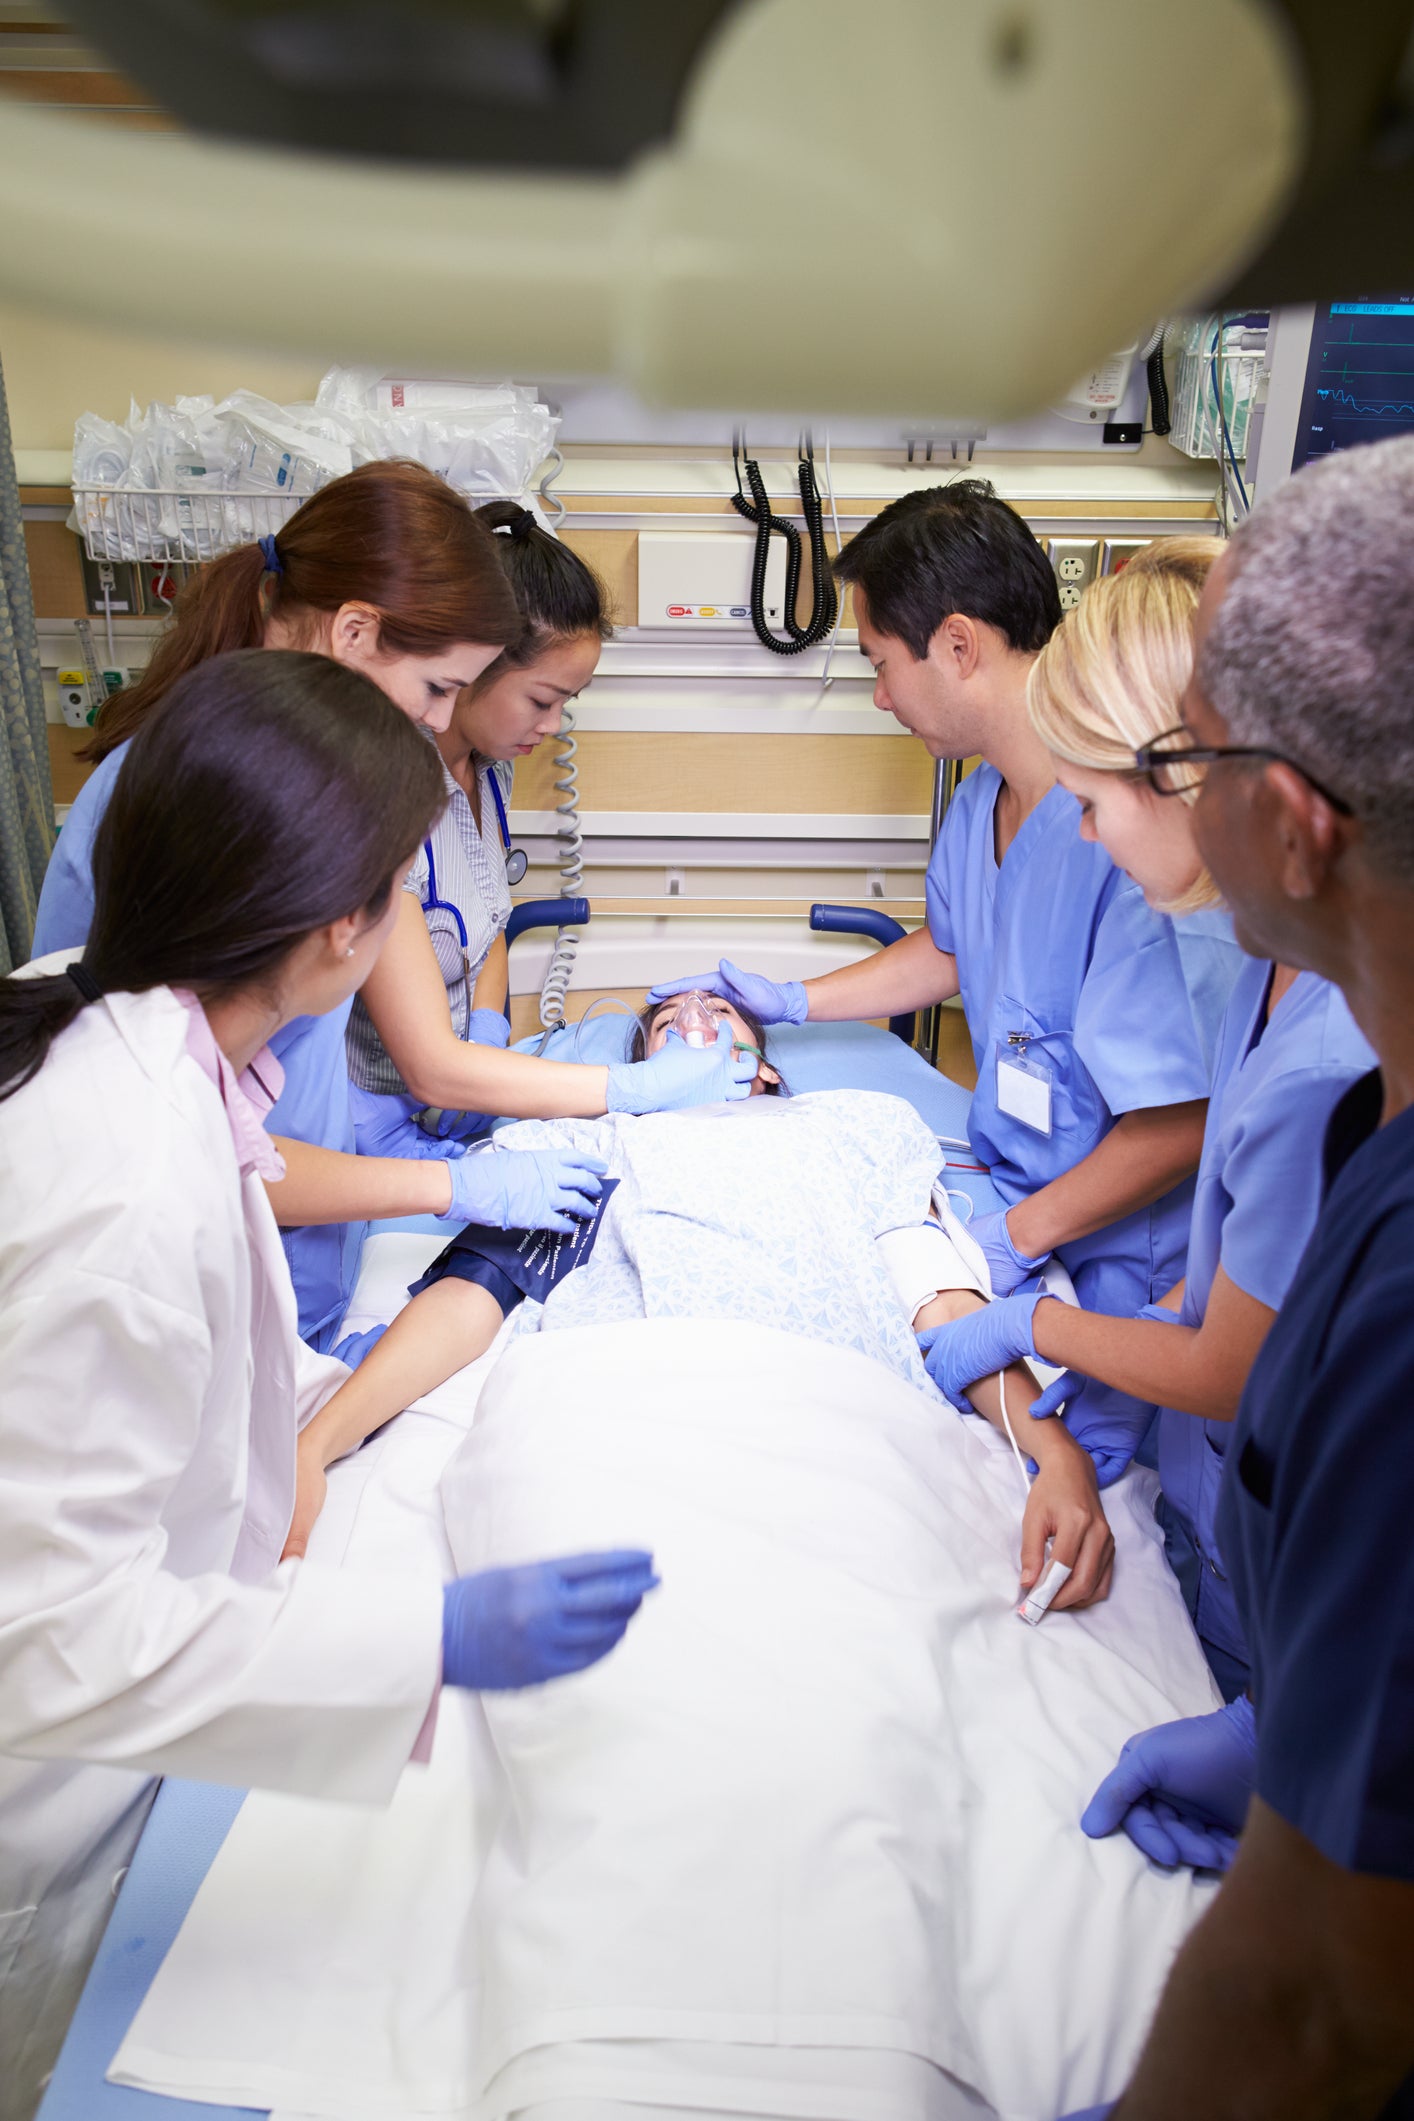 Medical Professionals providing custom care on a medical table